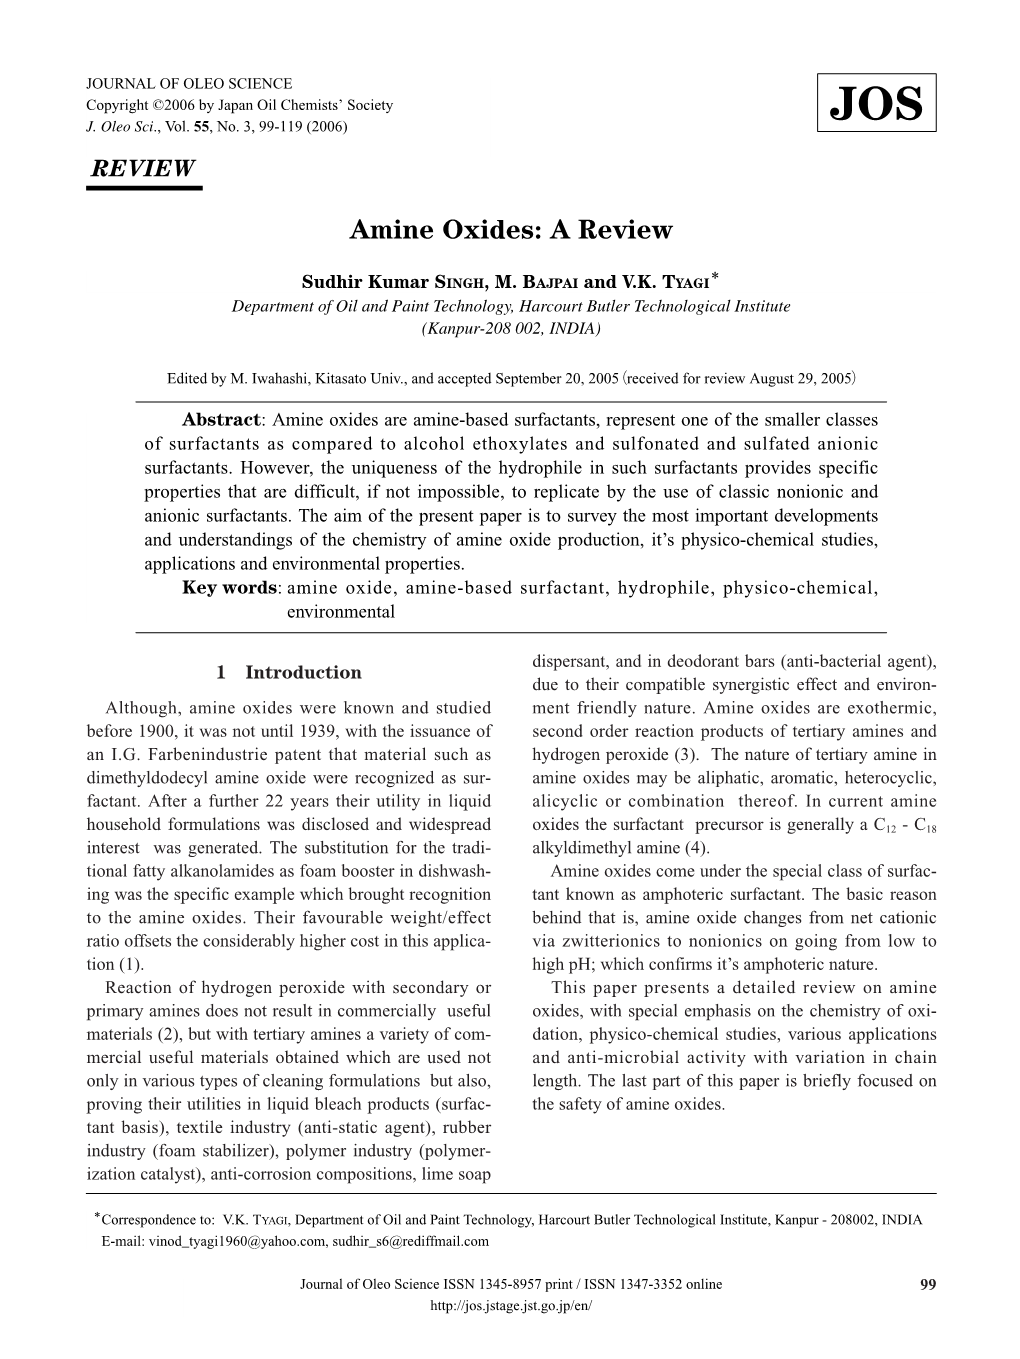 Amine Oxides: a Review